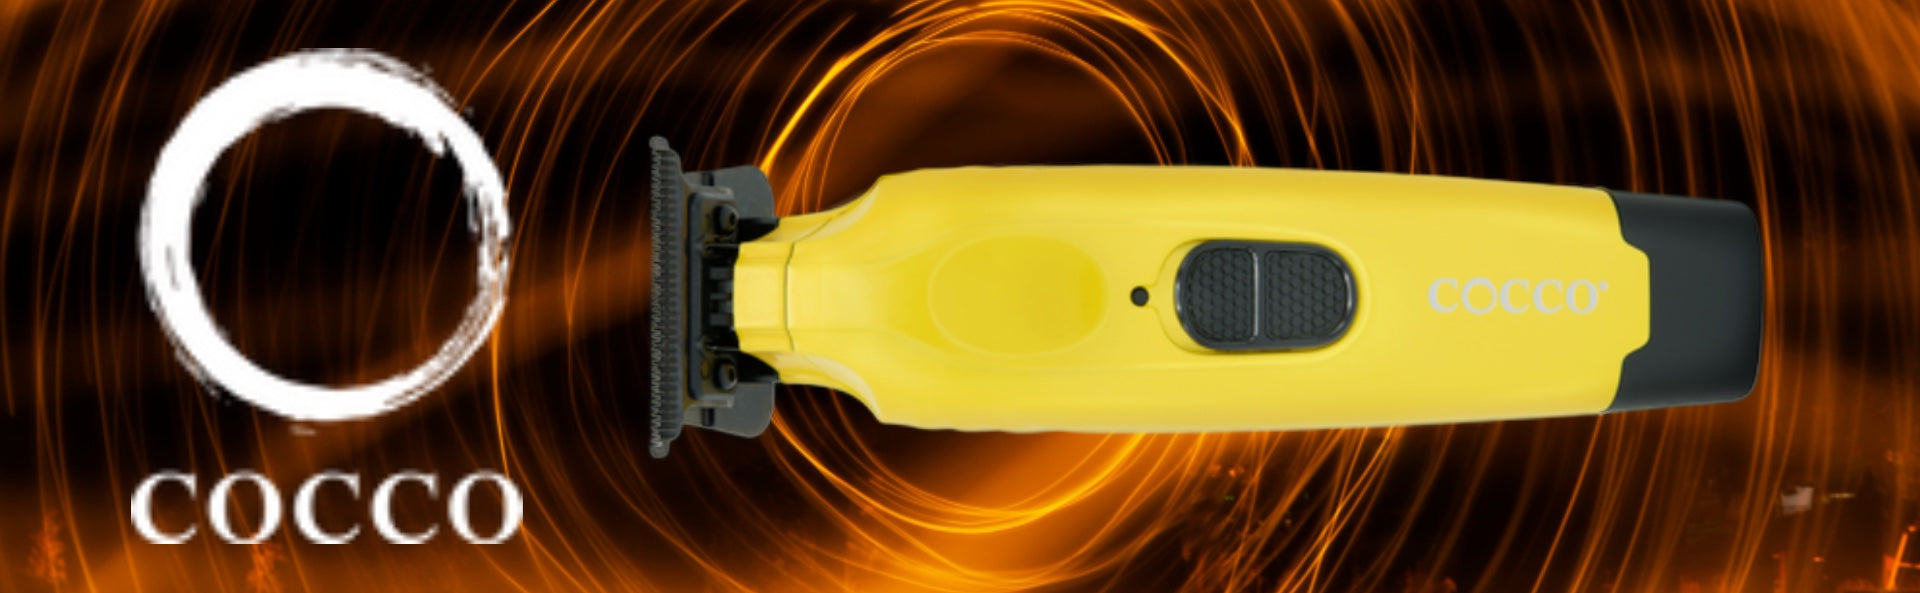 Cocco Hyper Veloce Pro Trimmer in Bold Yellow with High-Torque Motor and Precision DLC Blade